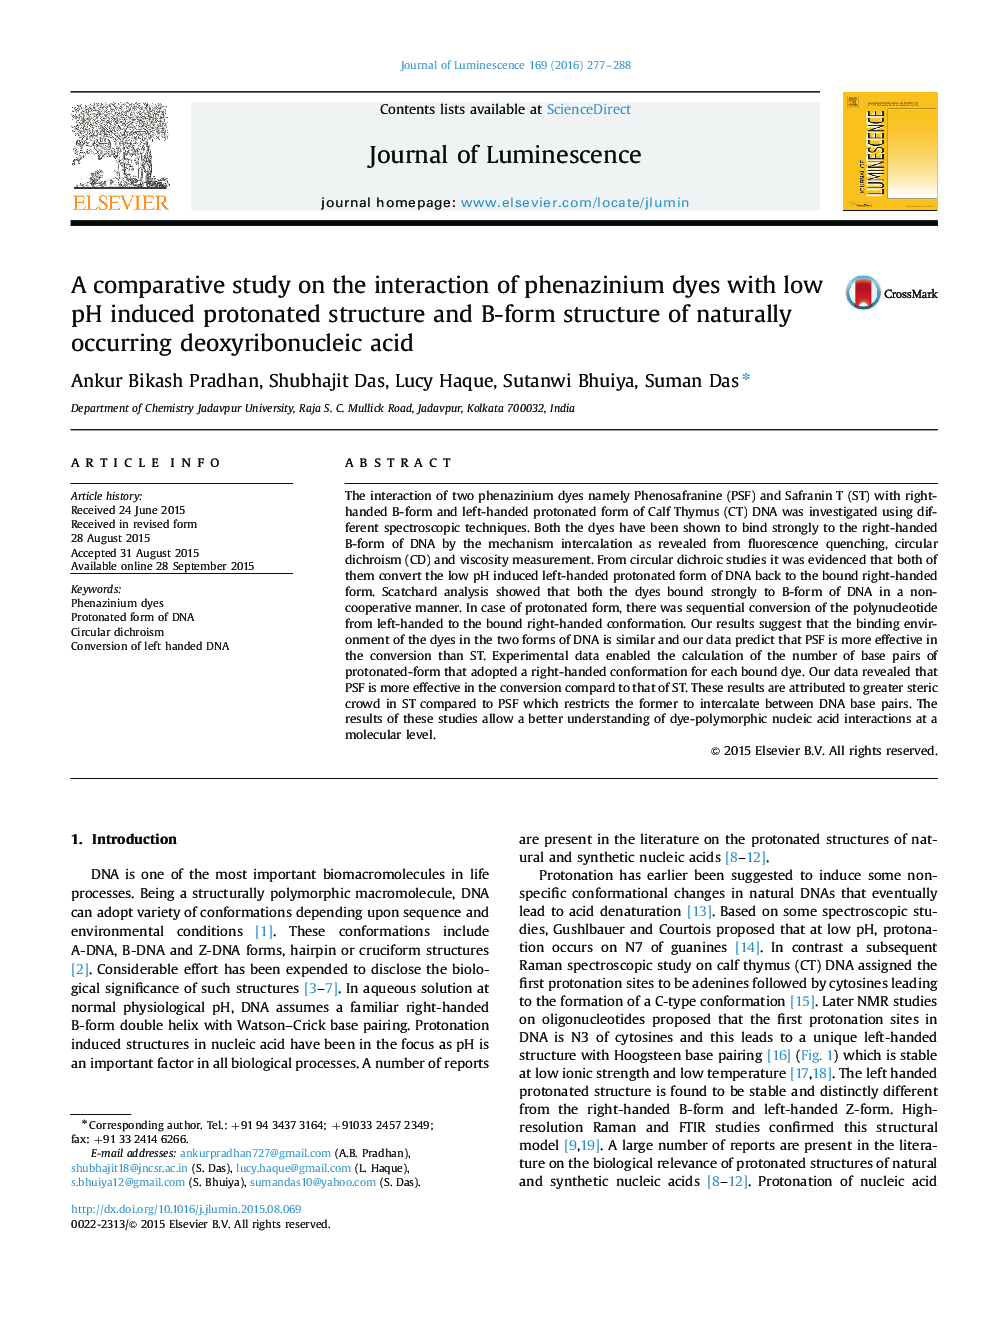 A comparative study on the interaction of phenazinium dyes with low pH induced protonated structure and B-form structure of naturally occurring deoxyribonucleic acid